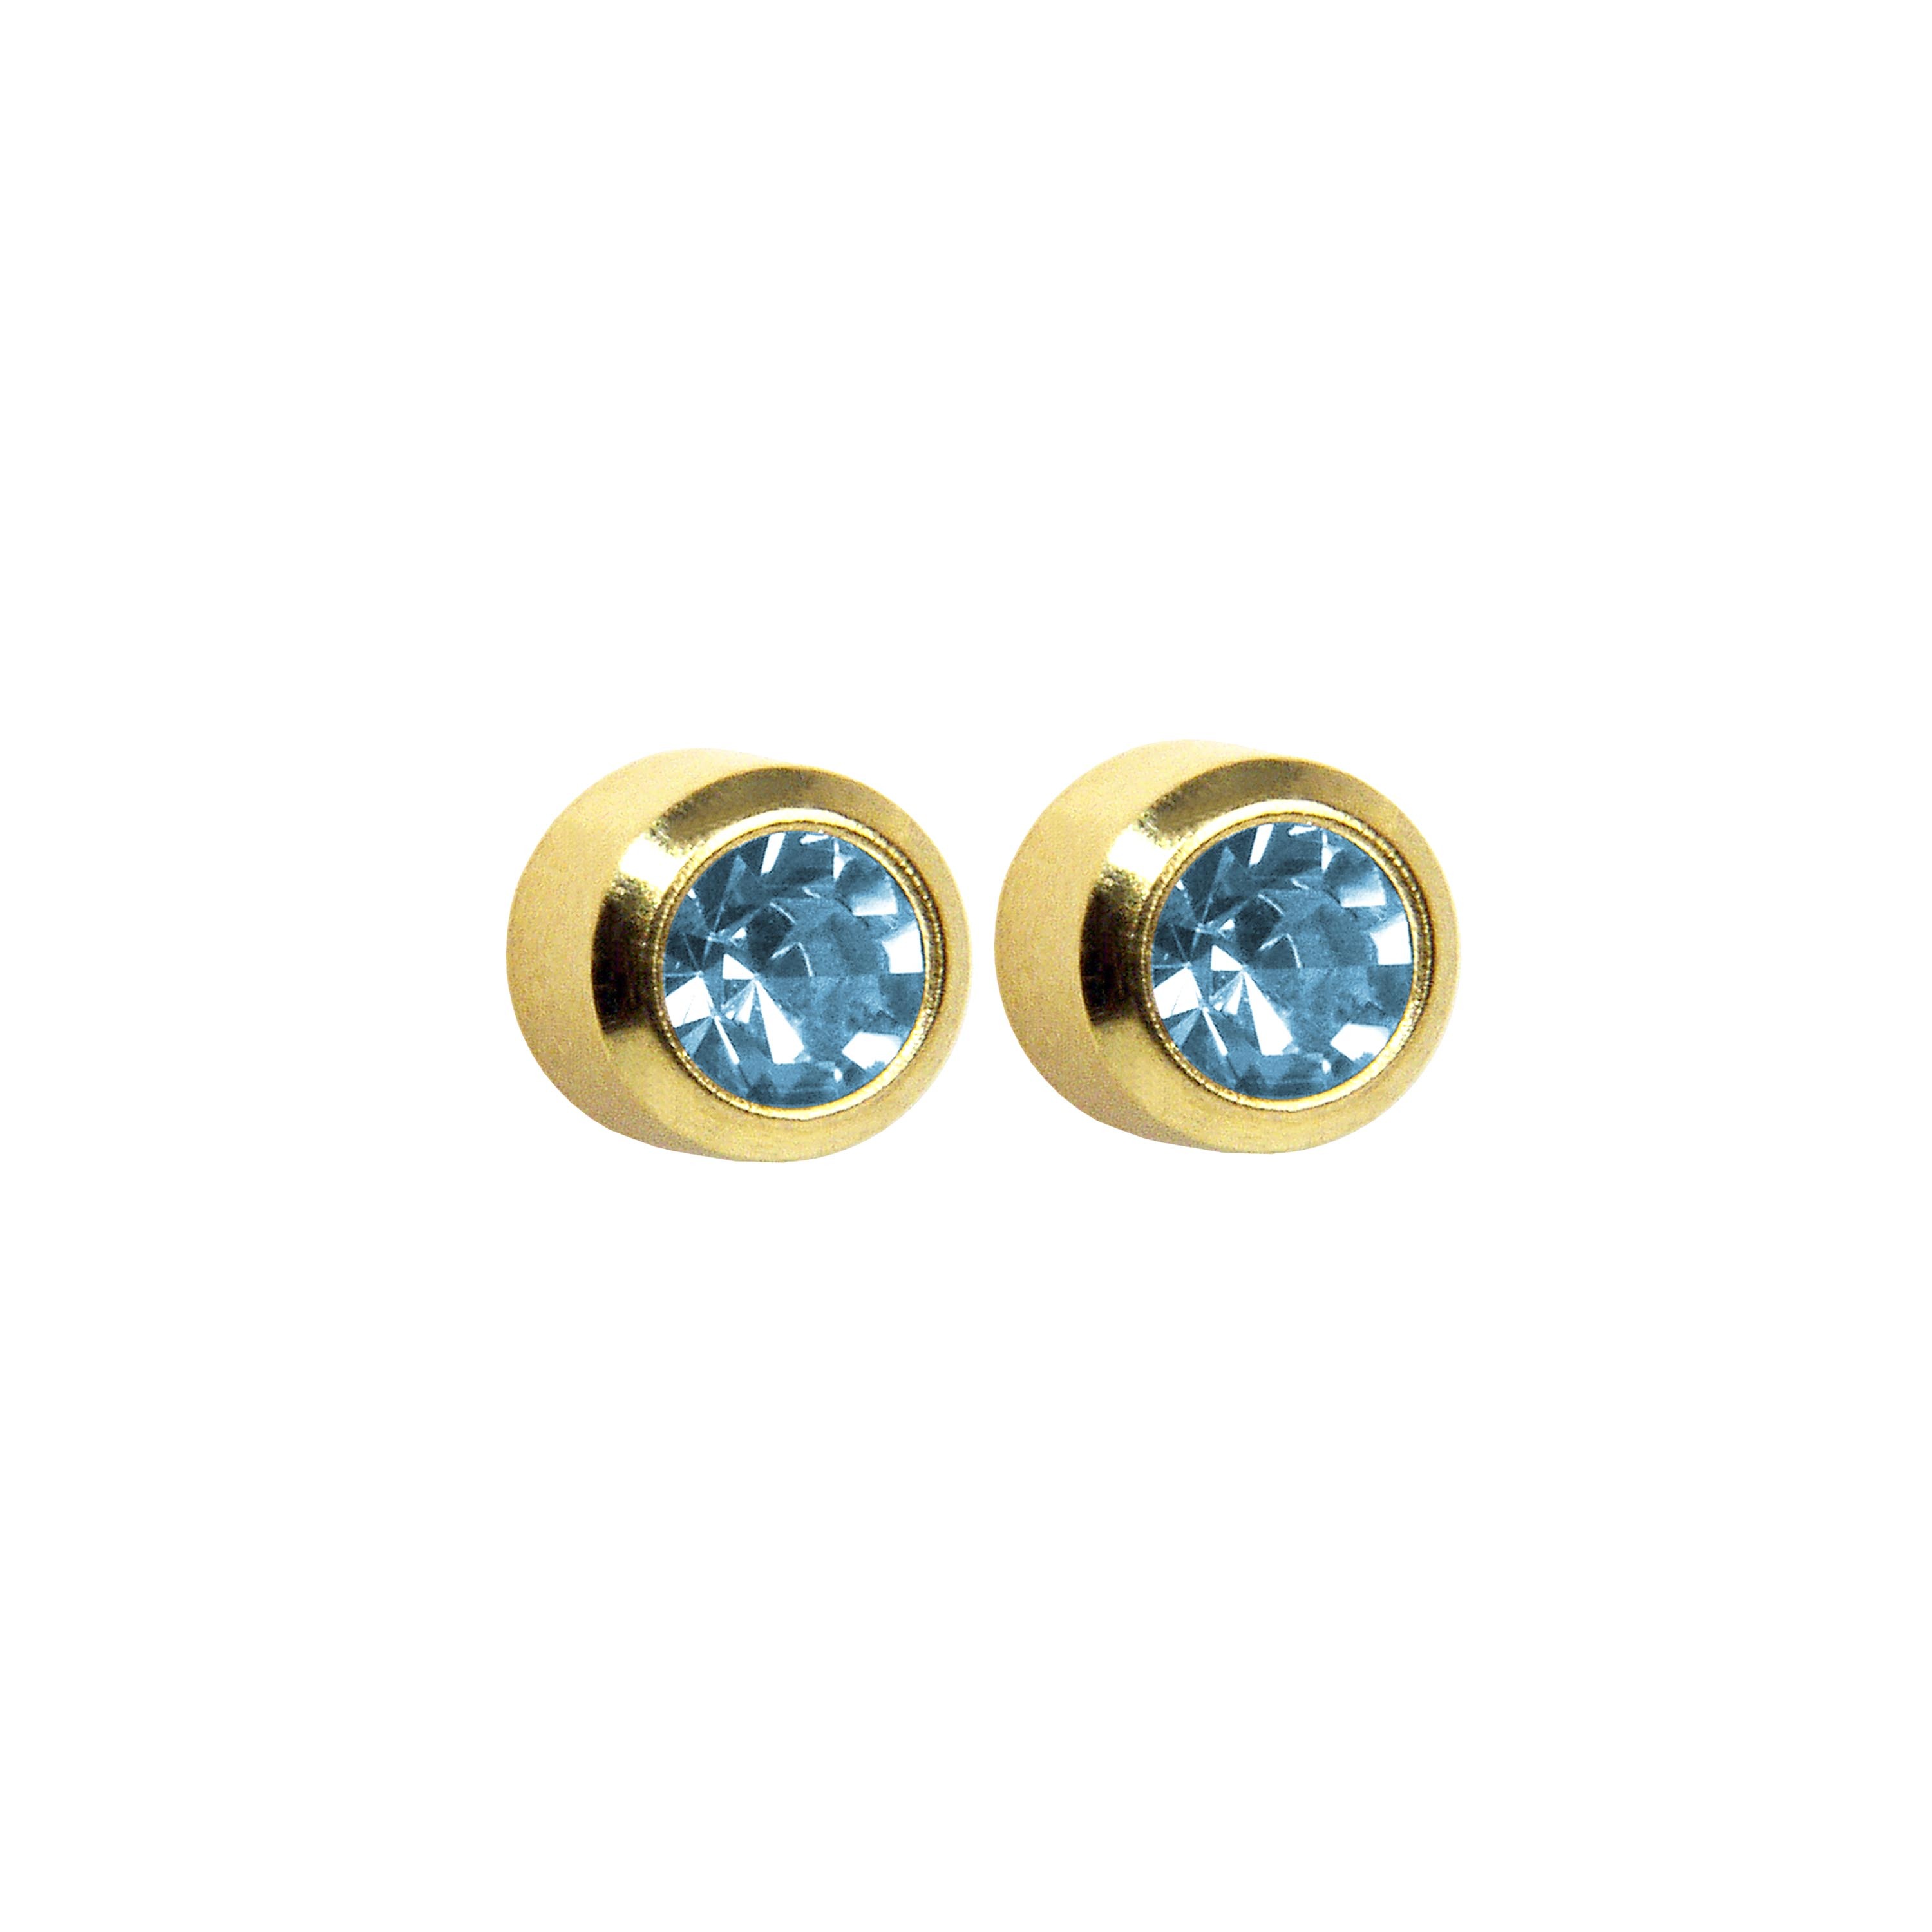 3MM - Bezel - March Aquamarine | 24K Gold Plated Piercing come Fashion Earrings | Studex Select